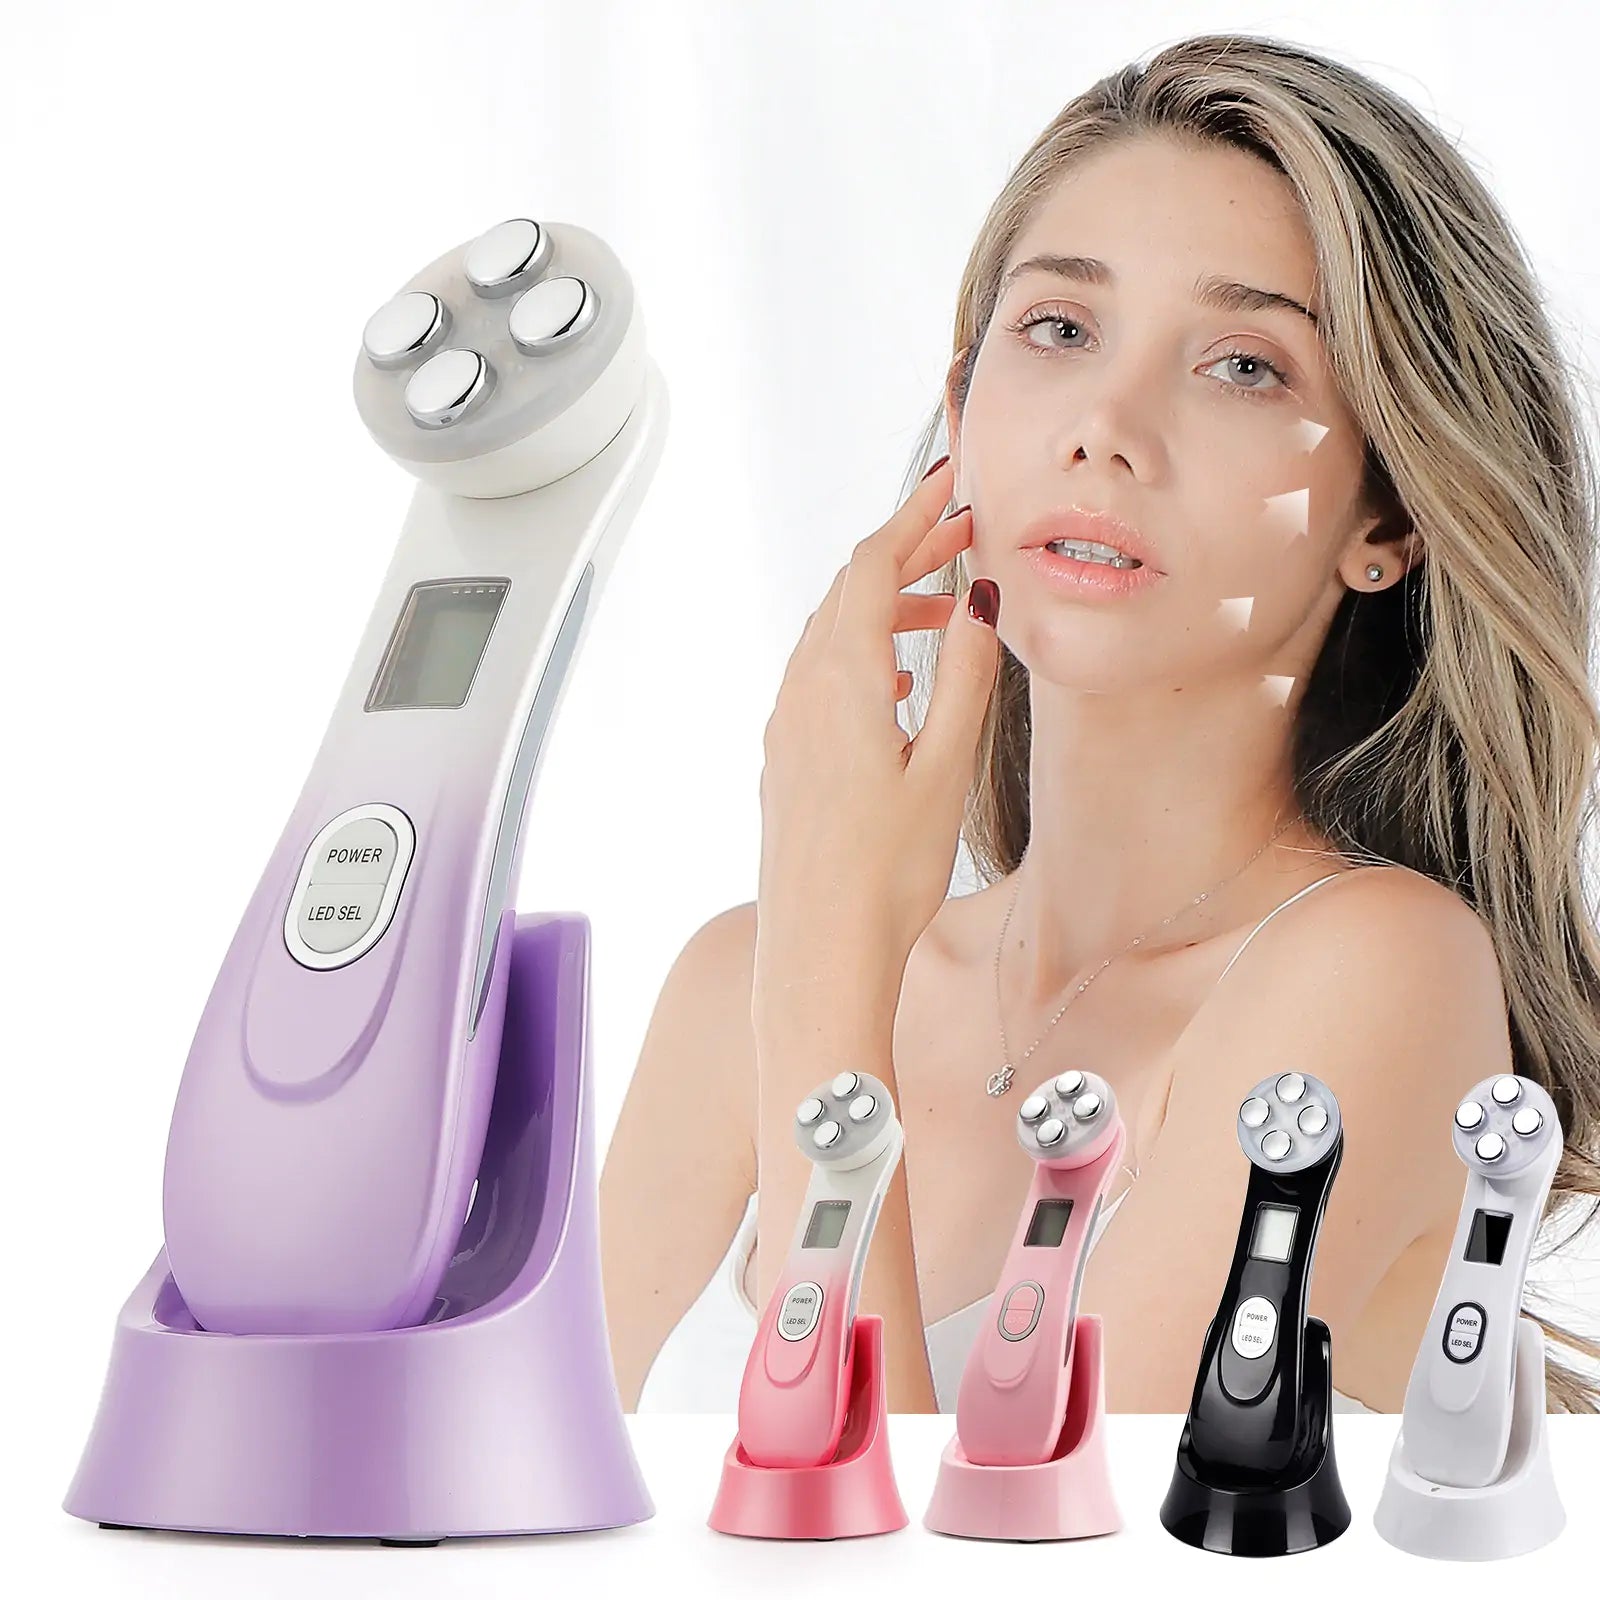 LED Facial Massage Device  My Store   